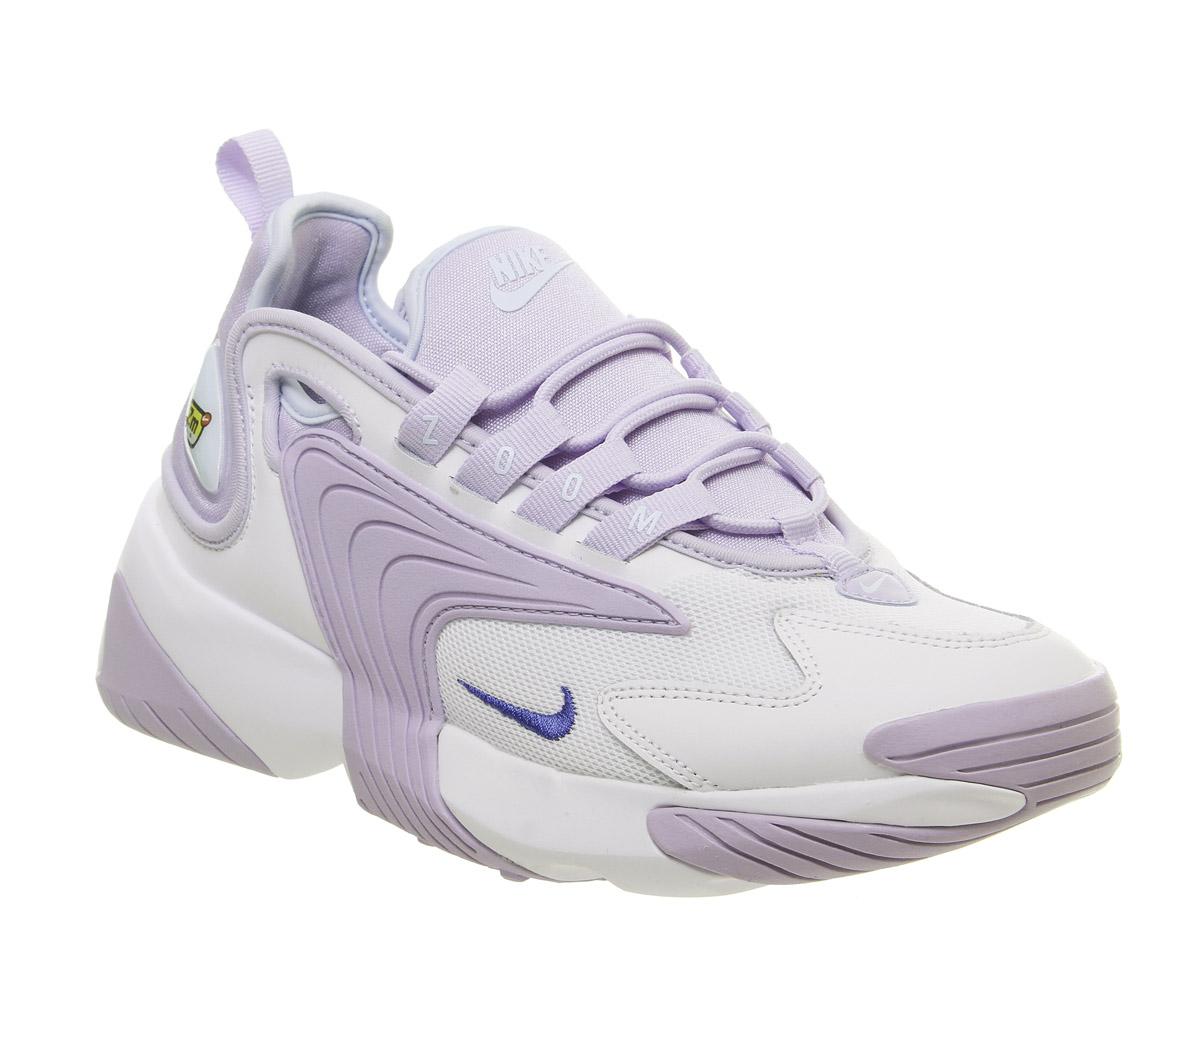 Nike Zoom 2k Trainers White Sapphire Oxygen Purple Teal F - Hers trainers